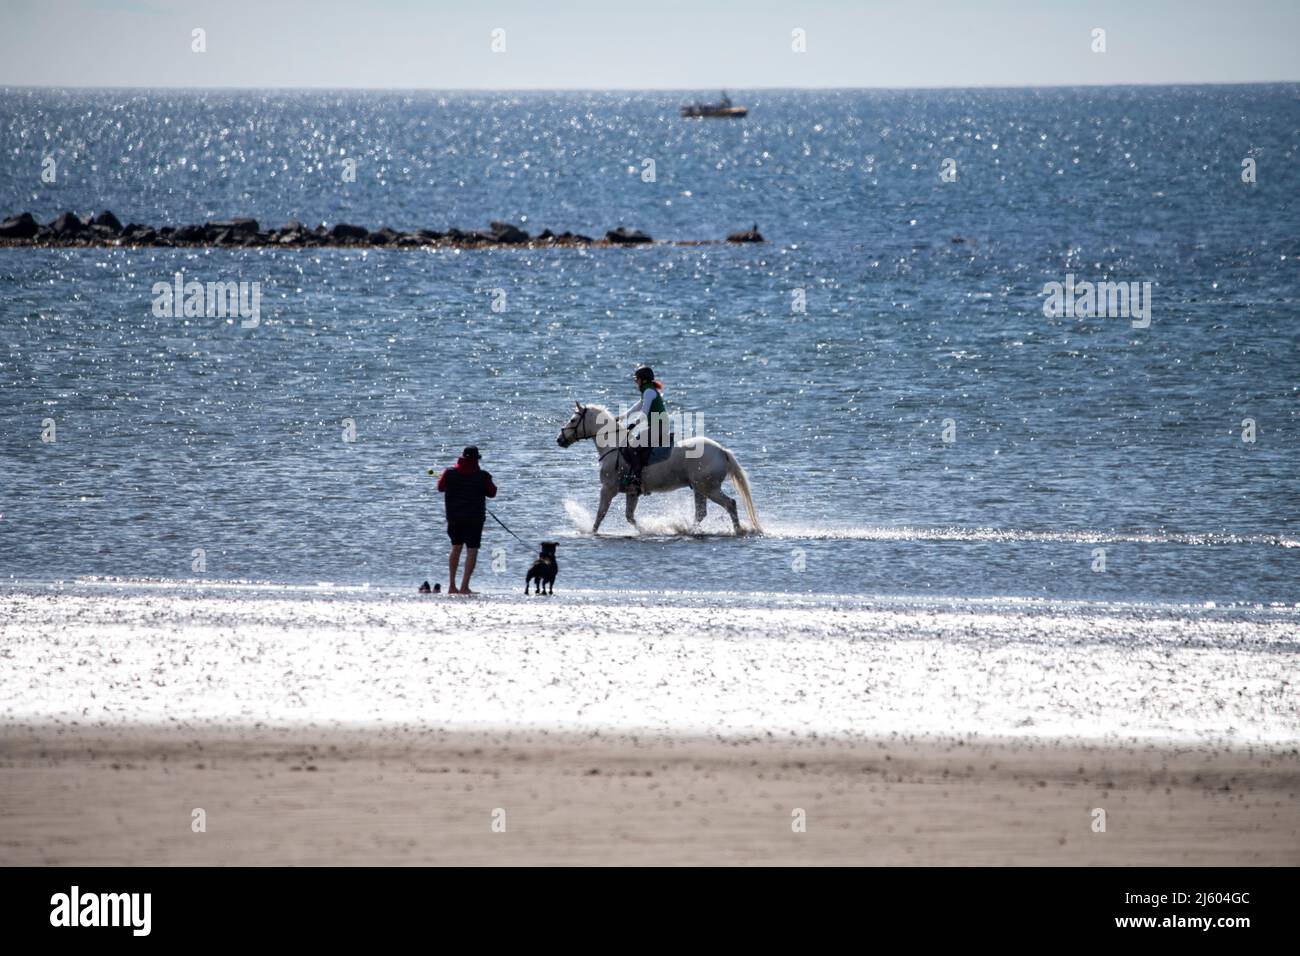 Ayr, Scotland, UK. 26th Apr, 2022. PICTURED: West of Scotland saw bright sunshine and blue sky at the seaside on Ayr Beach. People out walking and a horse rider takes their horse through a gallop in the cool sea water. Credit: Colin Fisher/Alamy Live News Stock Photo